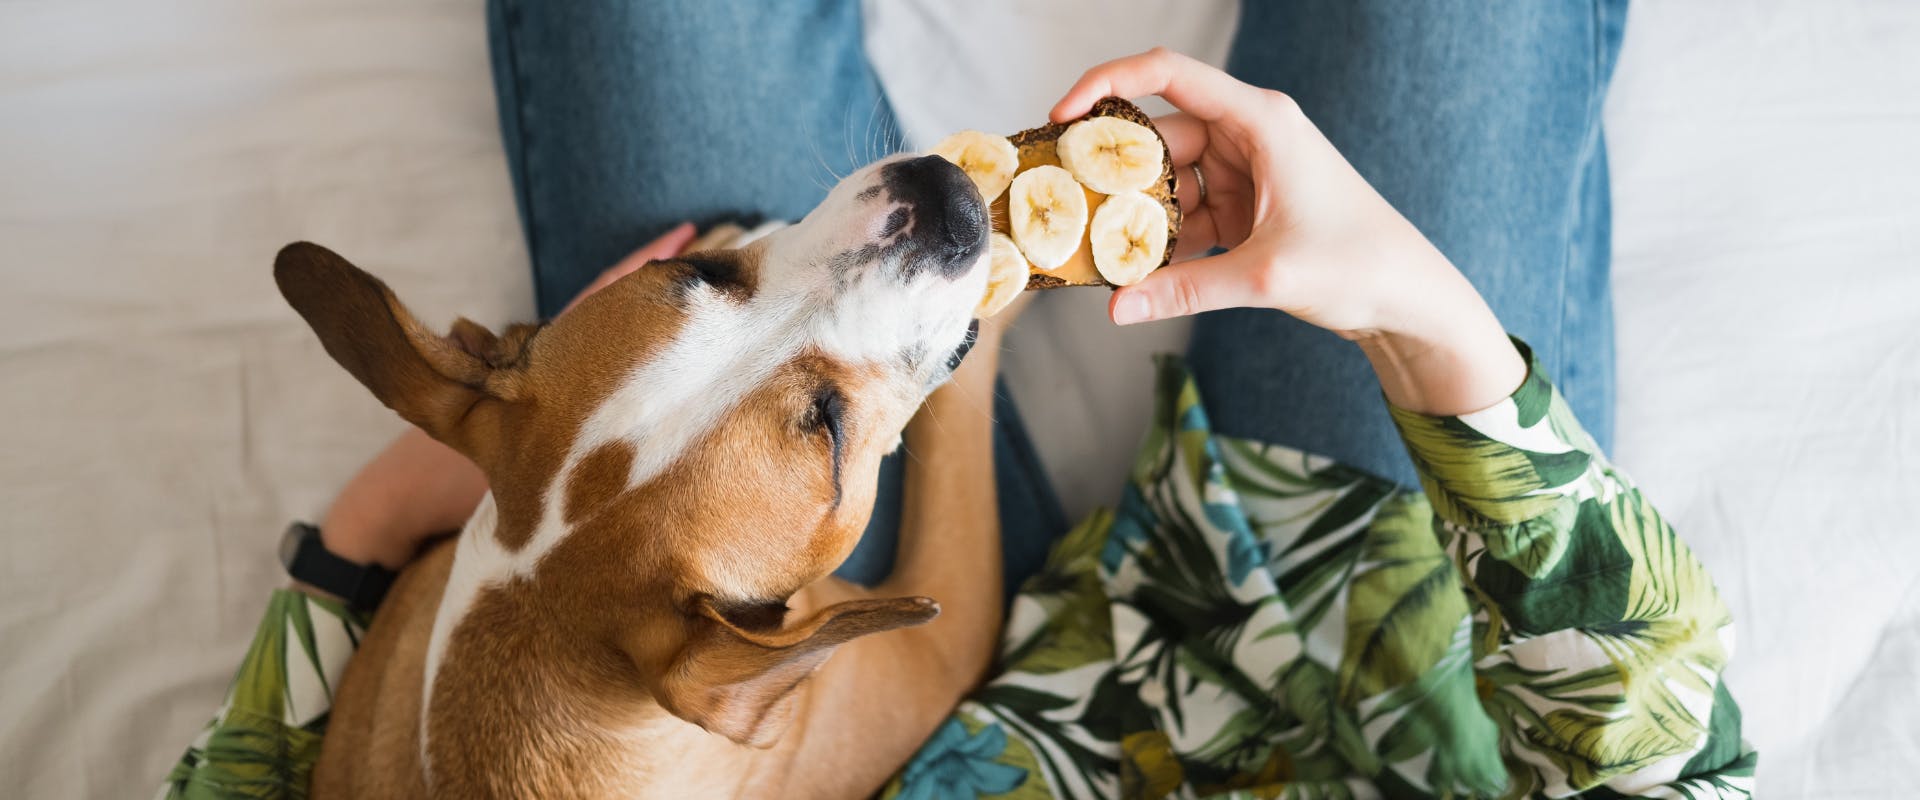 Brown and white dog eating banana and peanut butter on toast